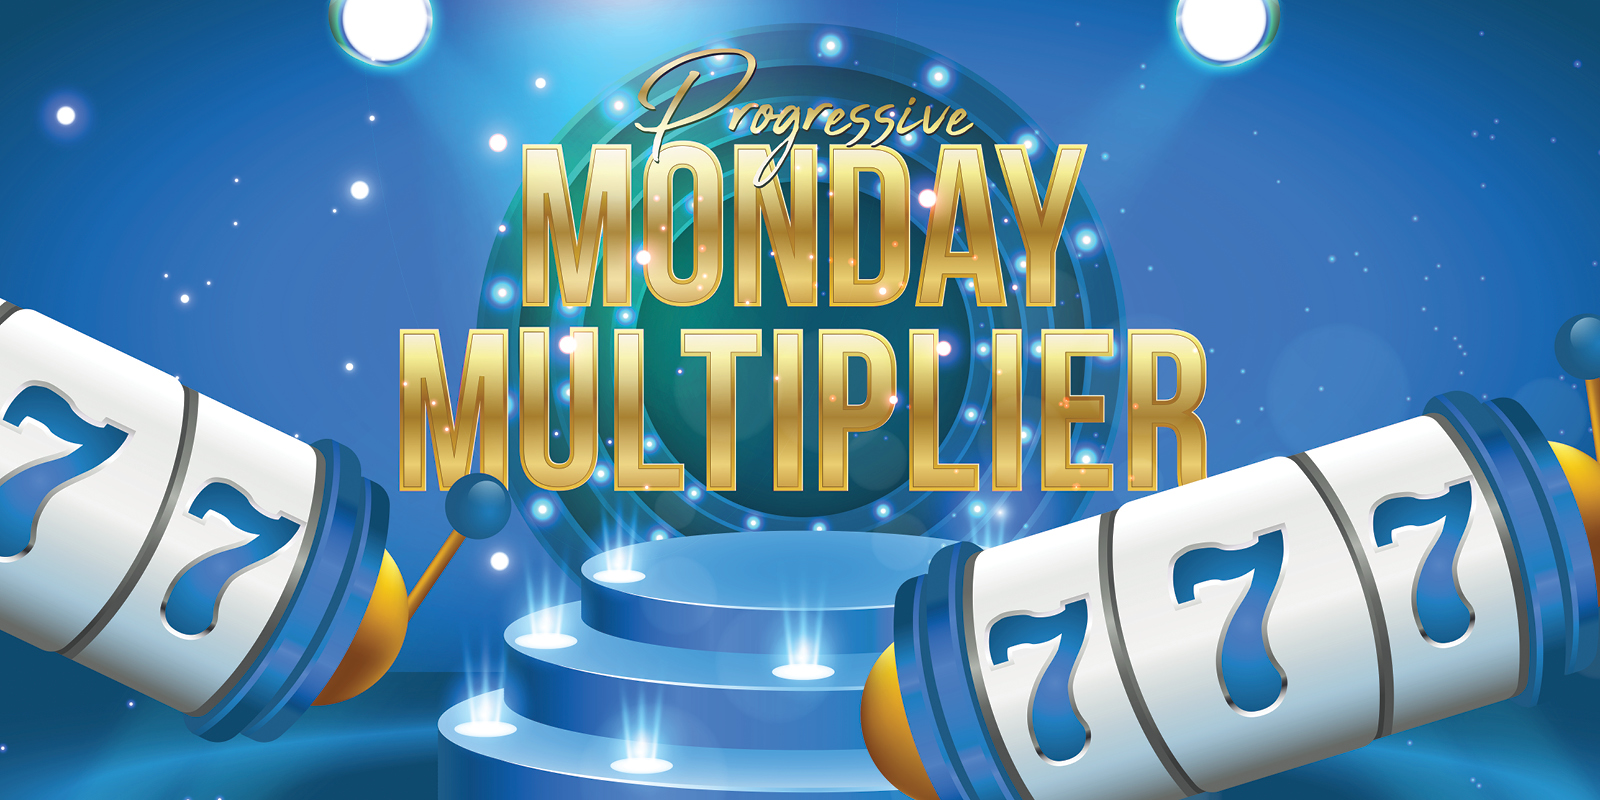 Progressive Monday Multiplier showing 7's with a blue and gold theme